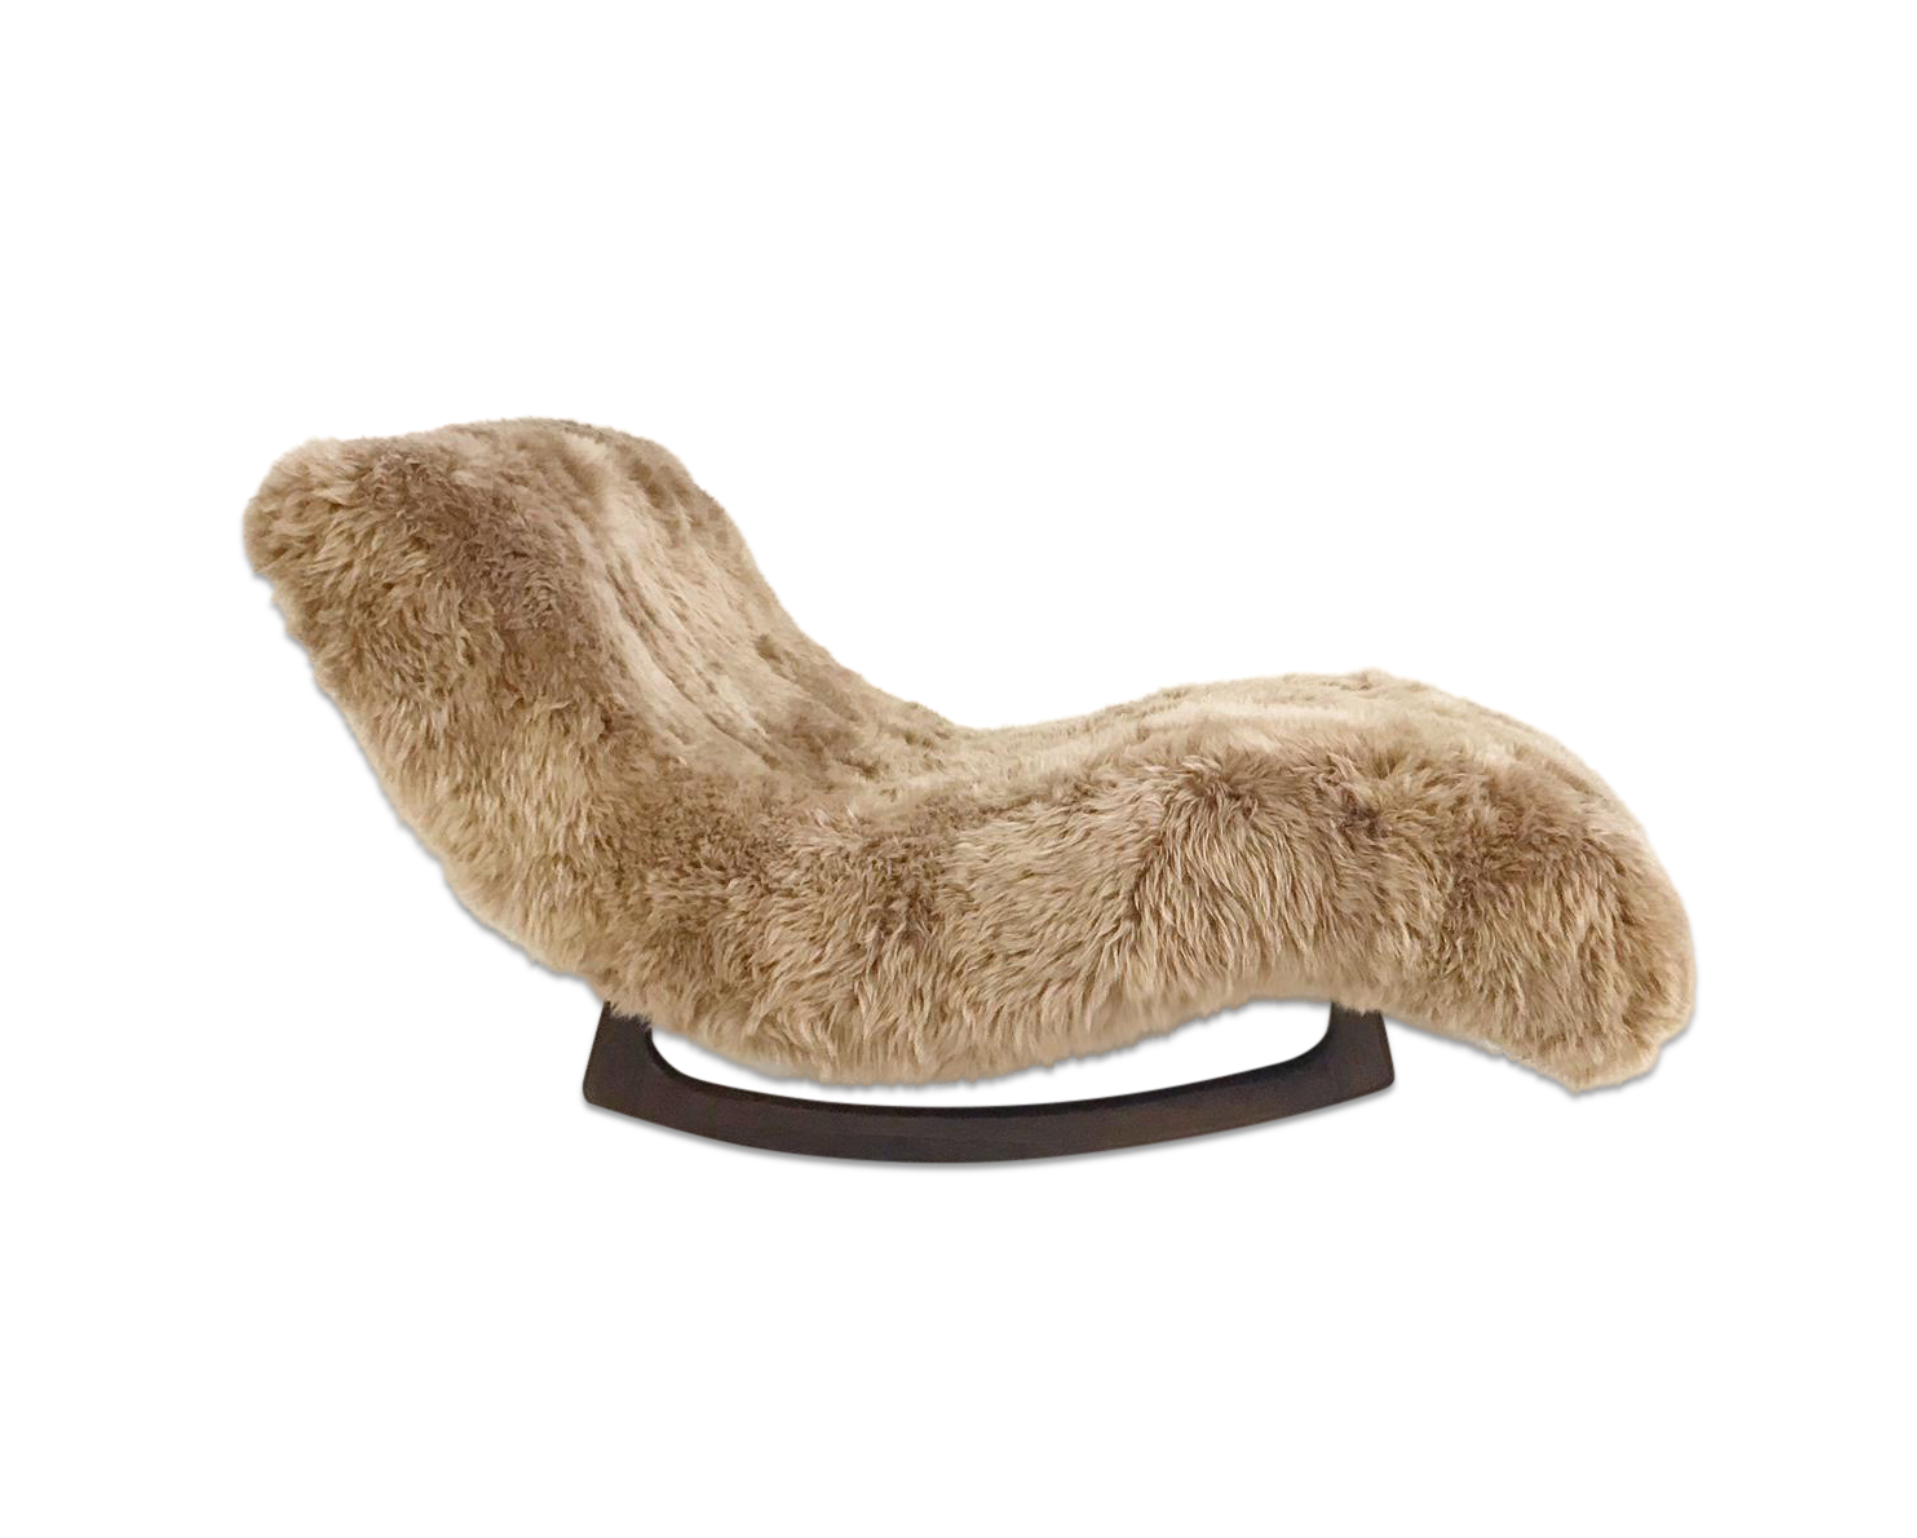 Rocking Wave Chaise Lounge in New Zealand Sheepskin - FORSYTH